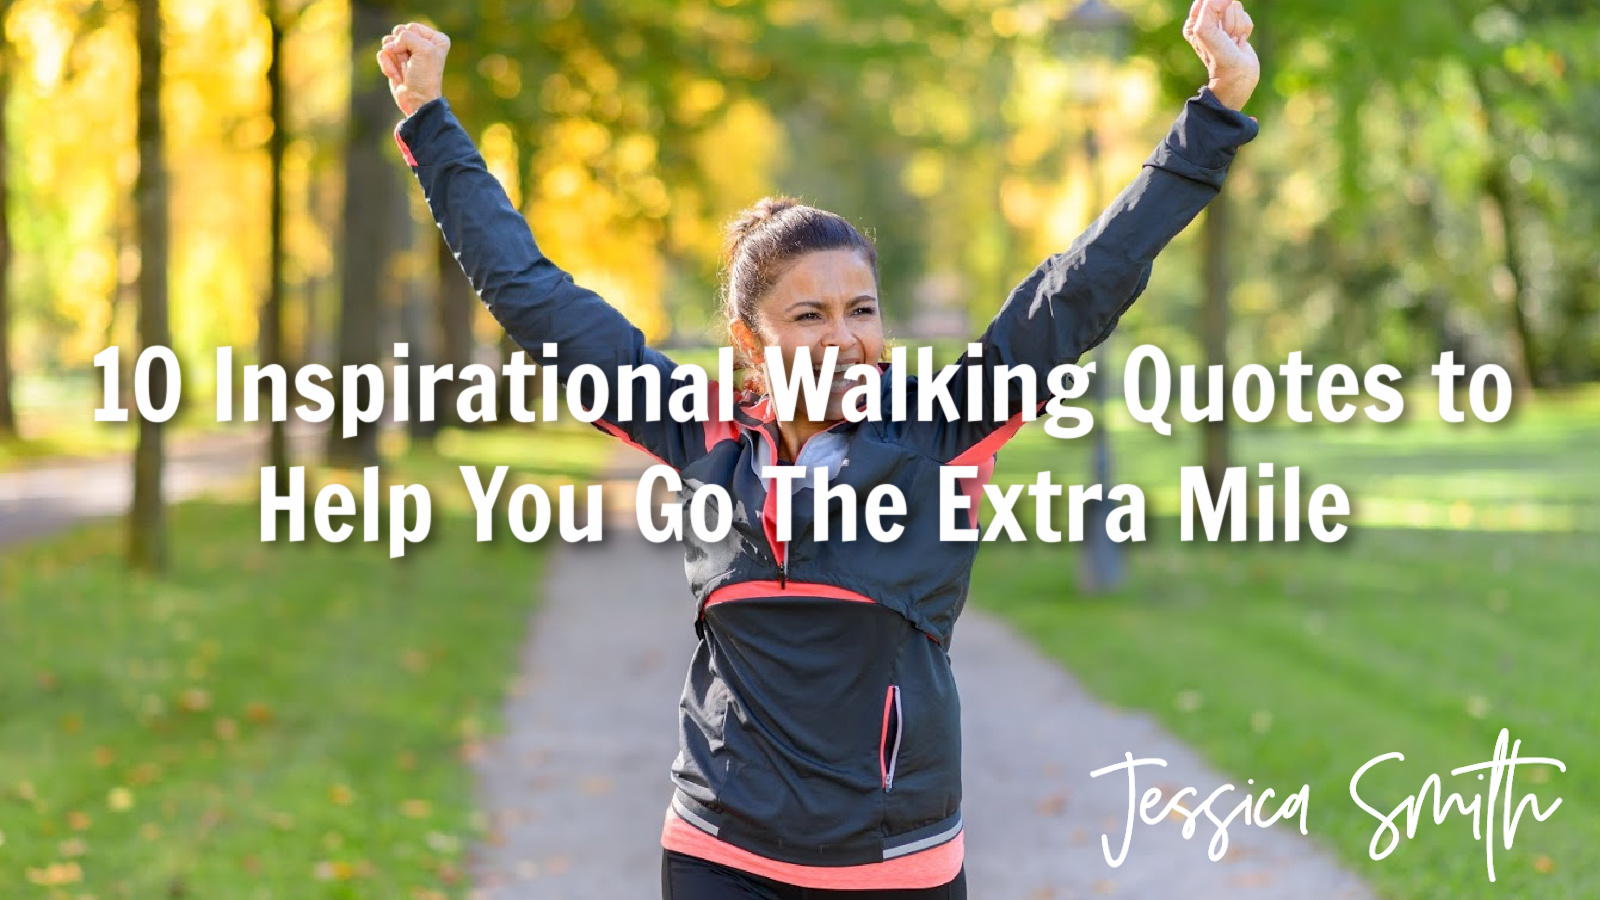 10 Inspirational Walking Quotes to Help You Go The Extra Mile